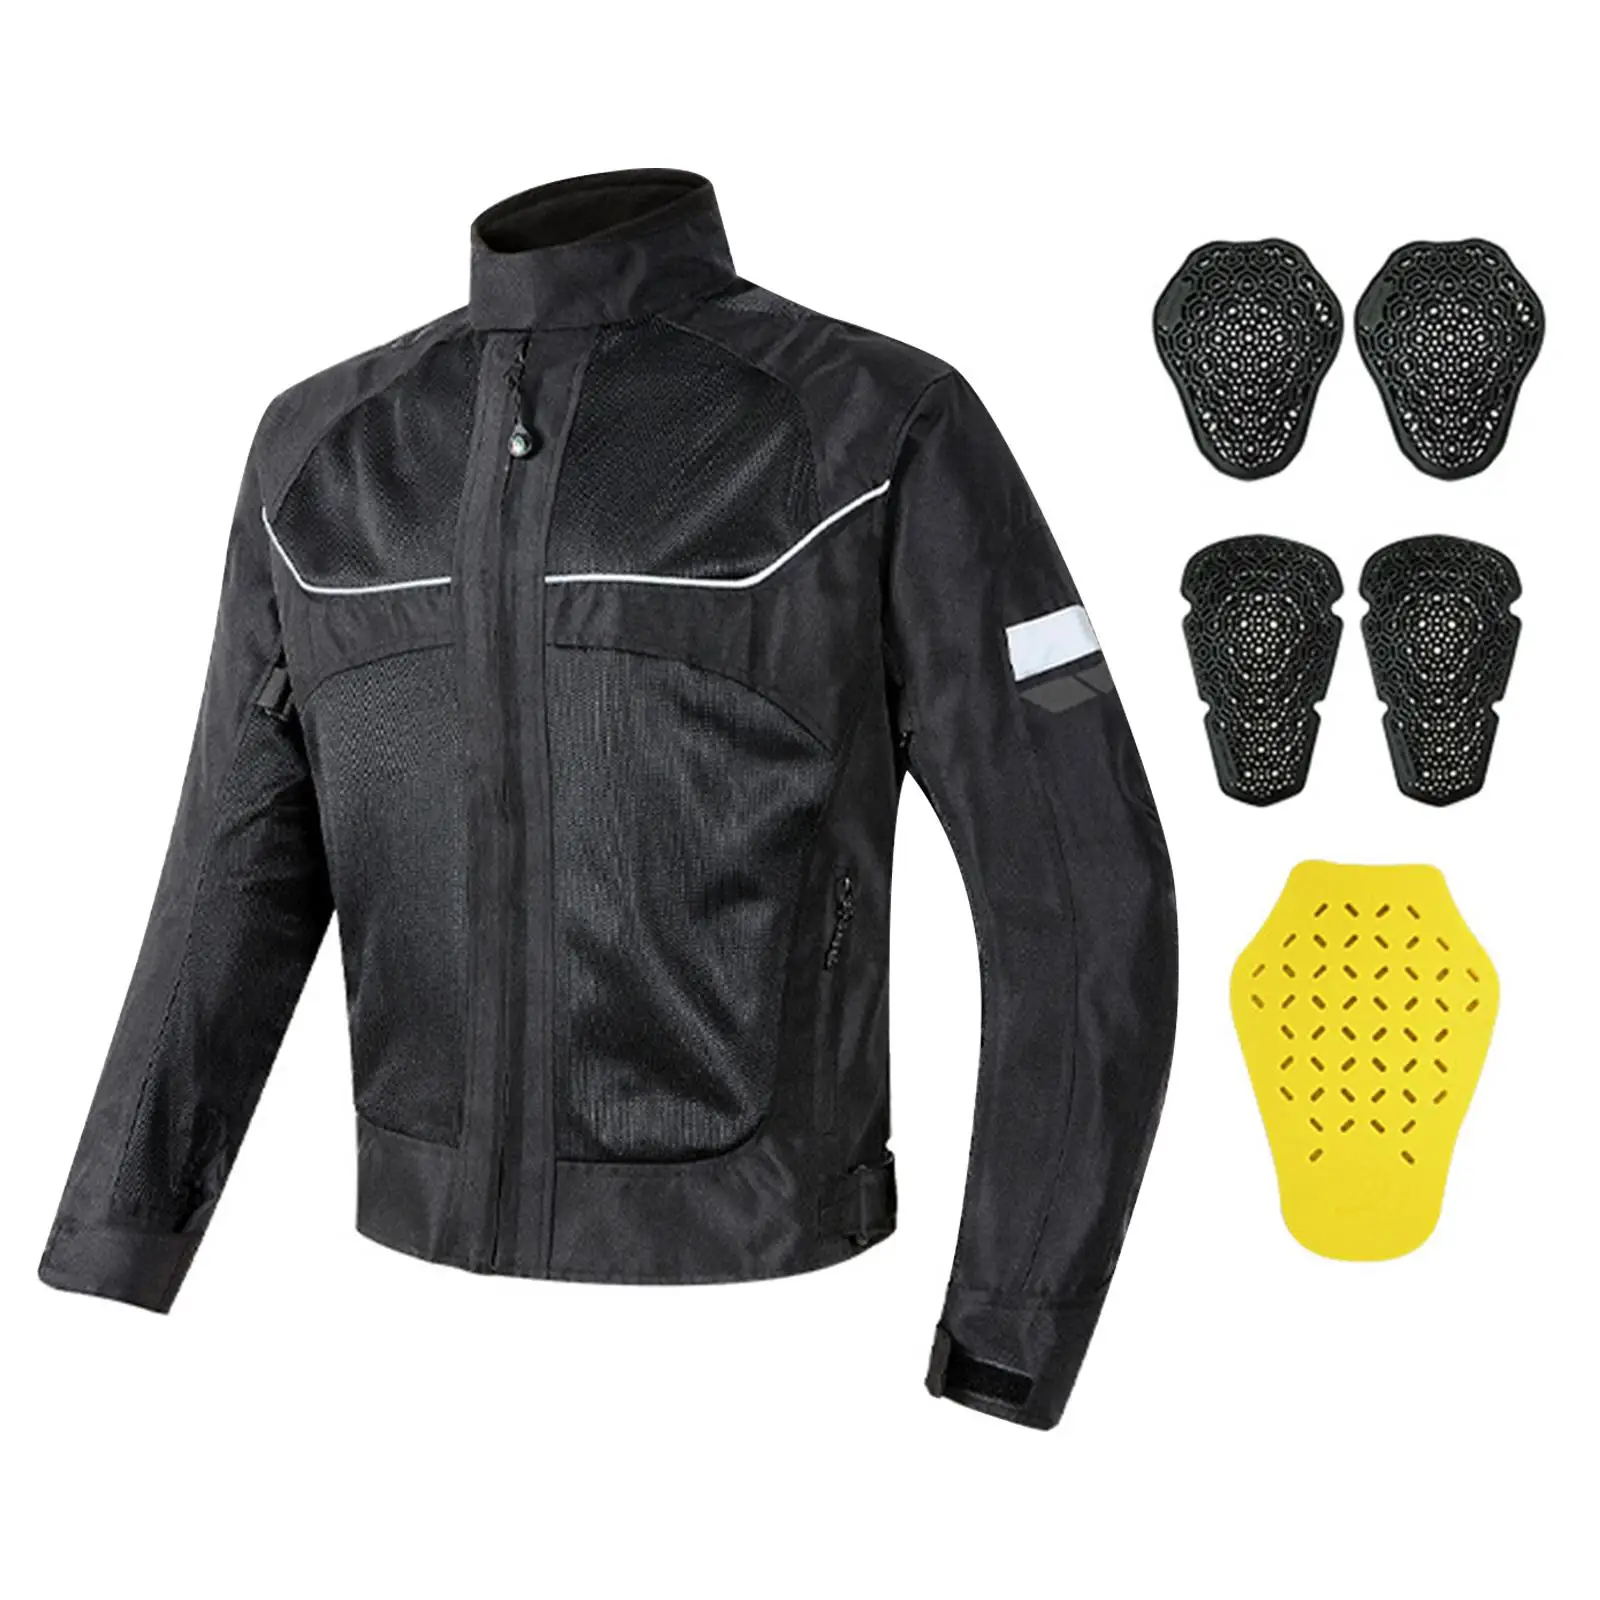 Motorcycle Riding Jacket Motorcyclist Jacket for Men Women Touring